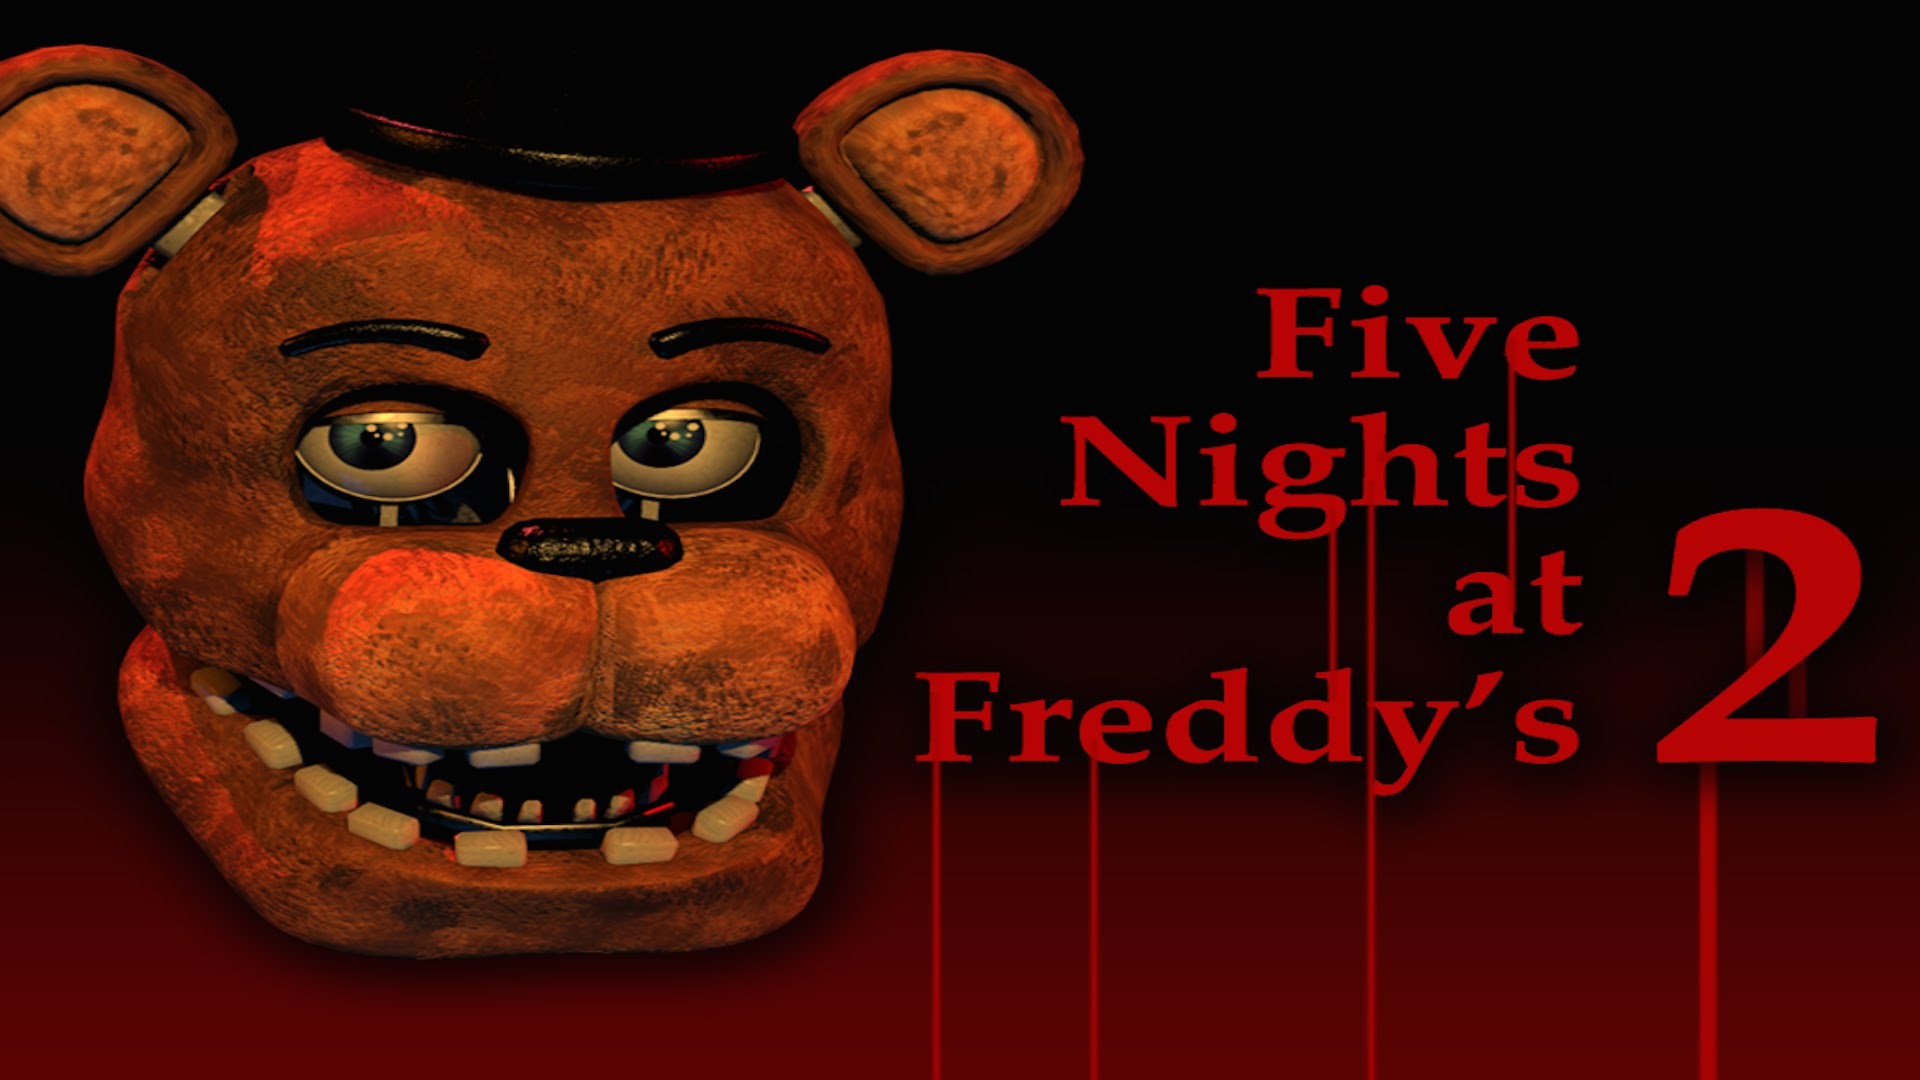 1920x1080 Five Nights at Freddy's 2 -Compatible with iPhone, iPad, and iPod touch.